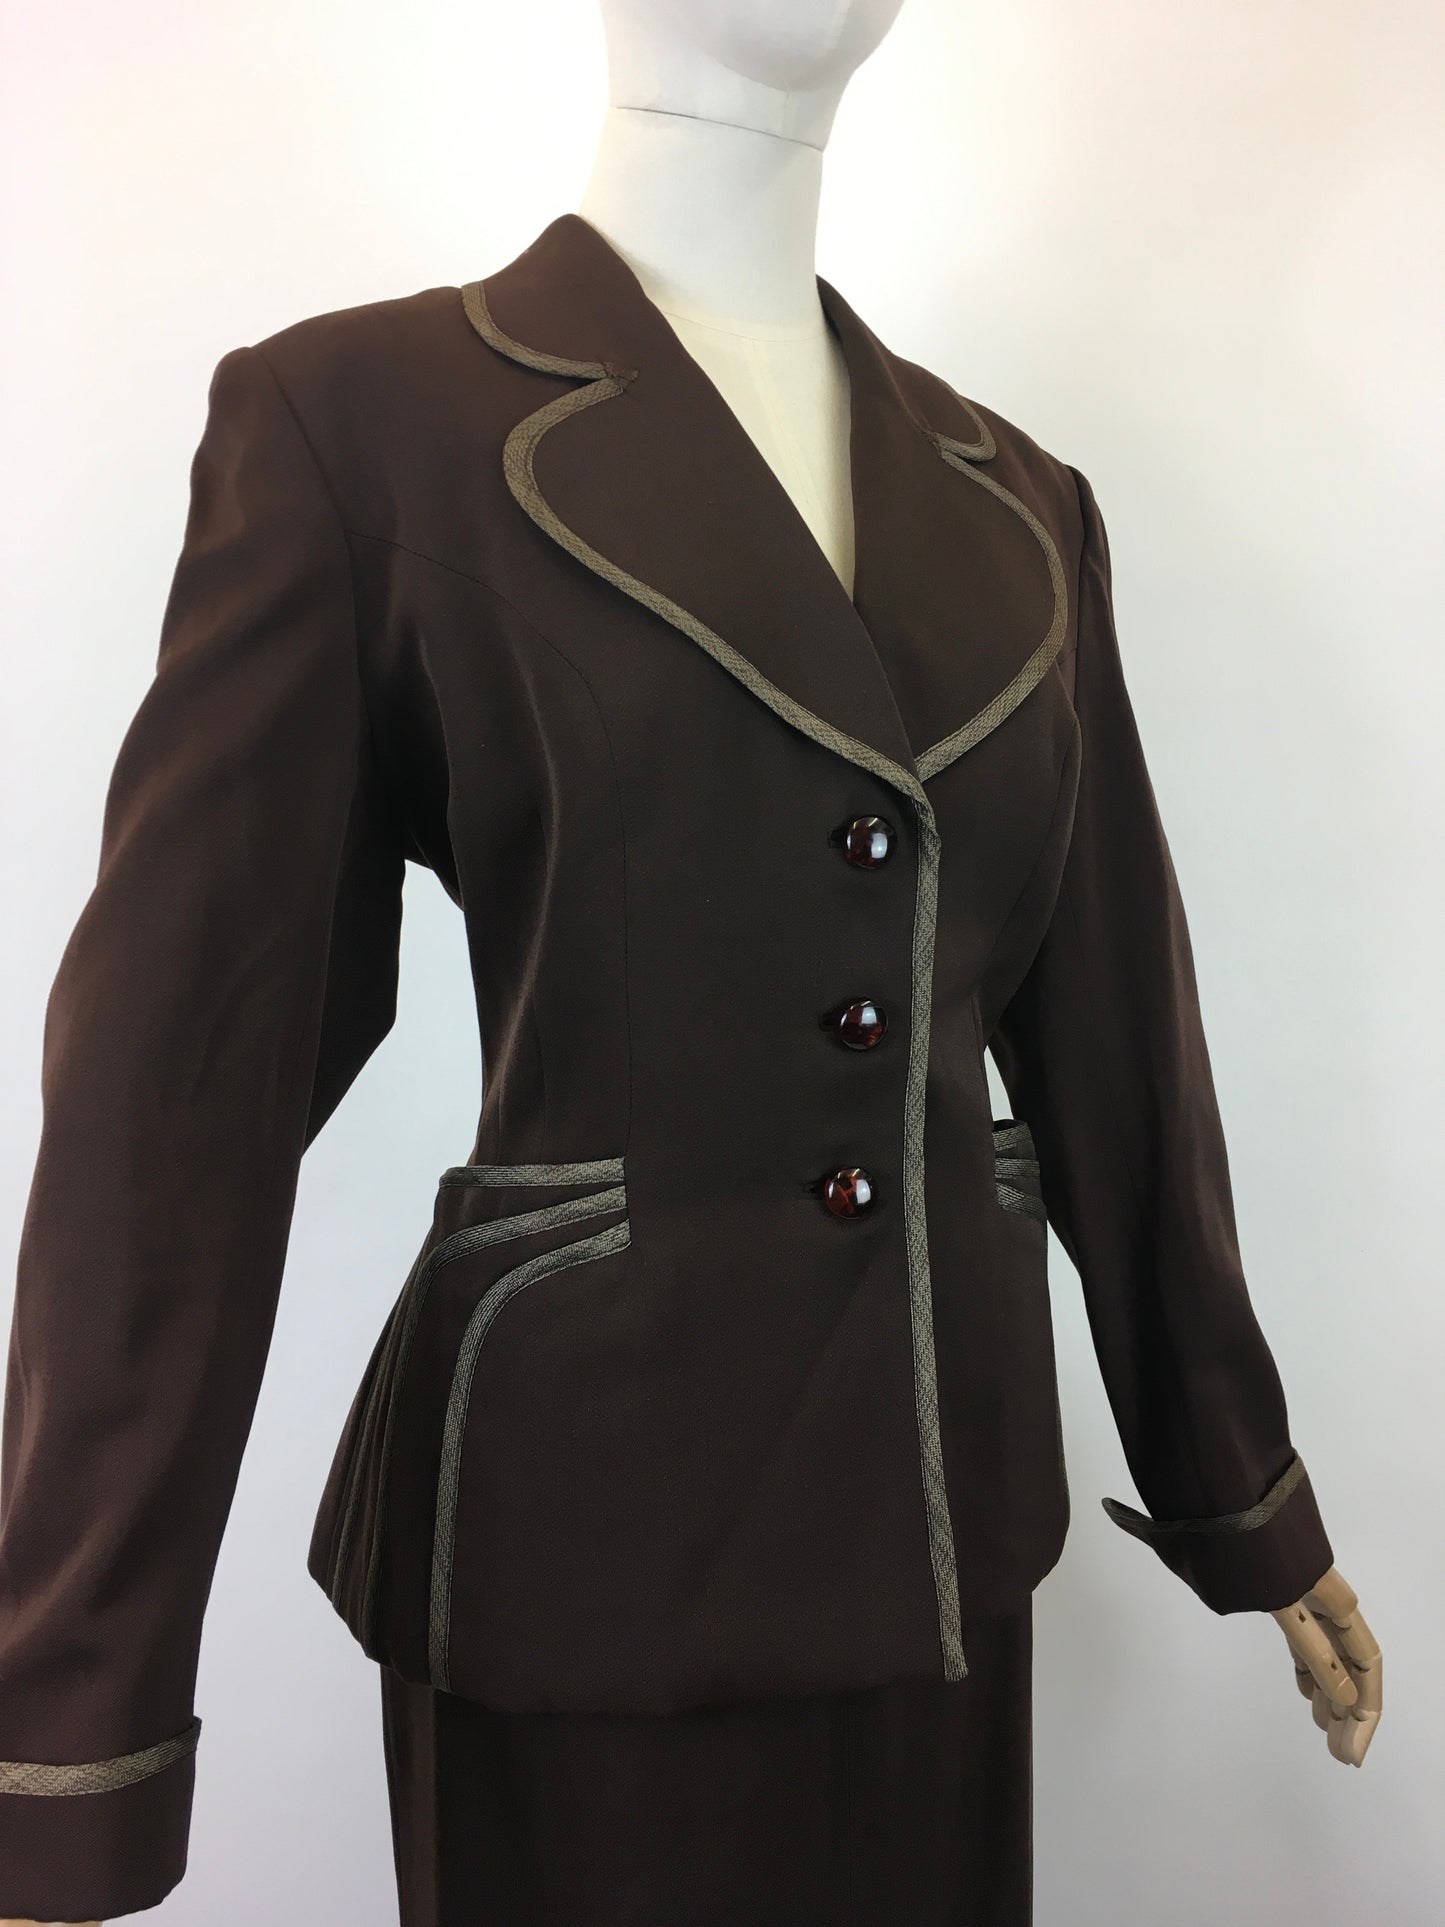 Original Sensational 1940’s American 2pc Suit by ‘ Betty Hill, California’ - In Rich Chocolate Brown with Stunning Details